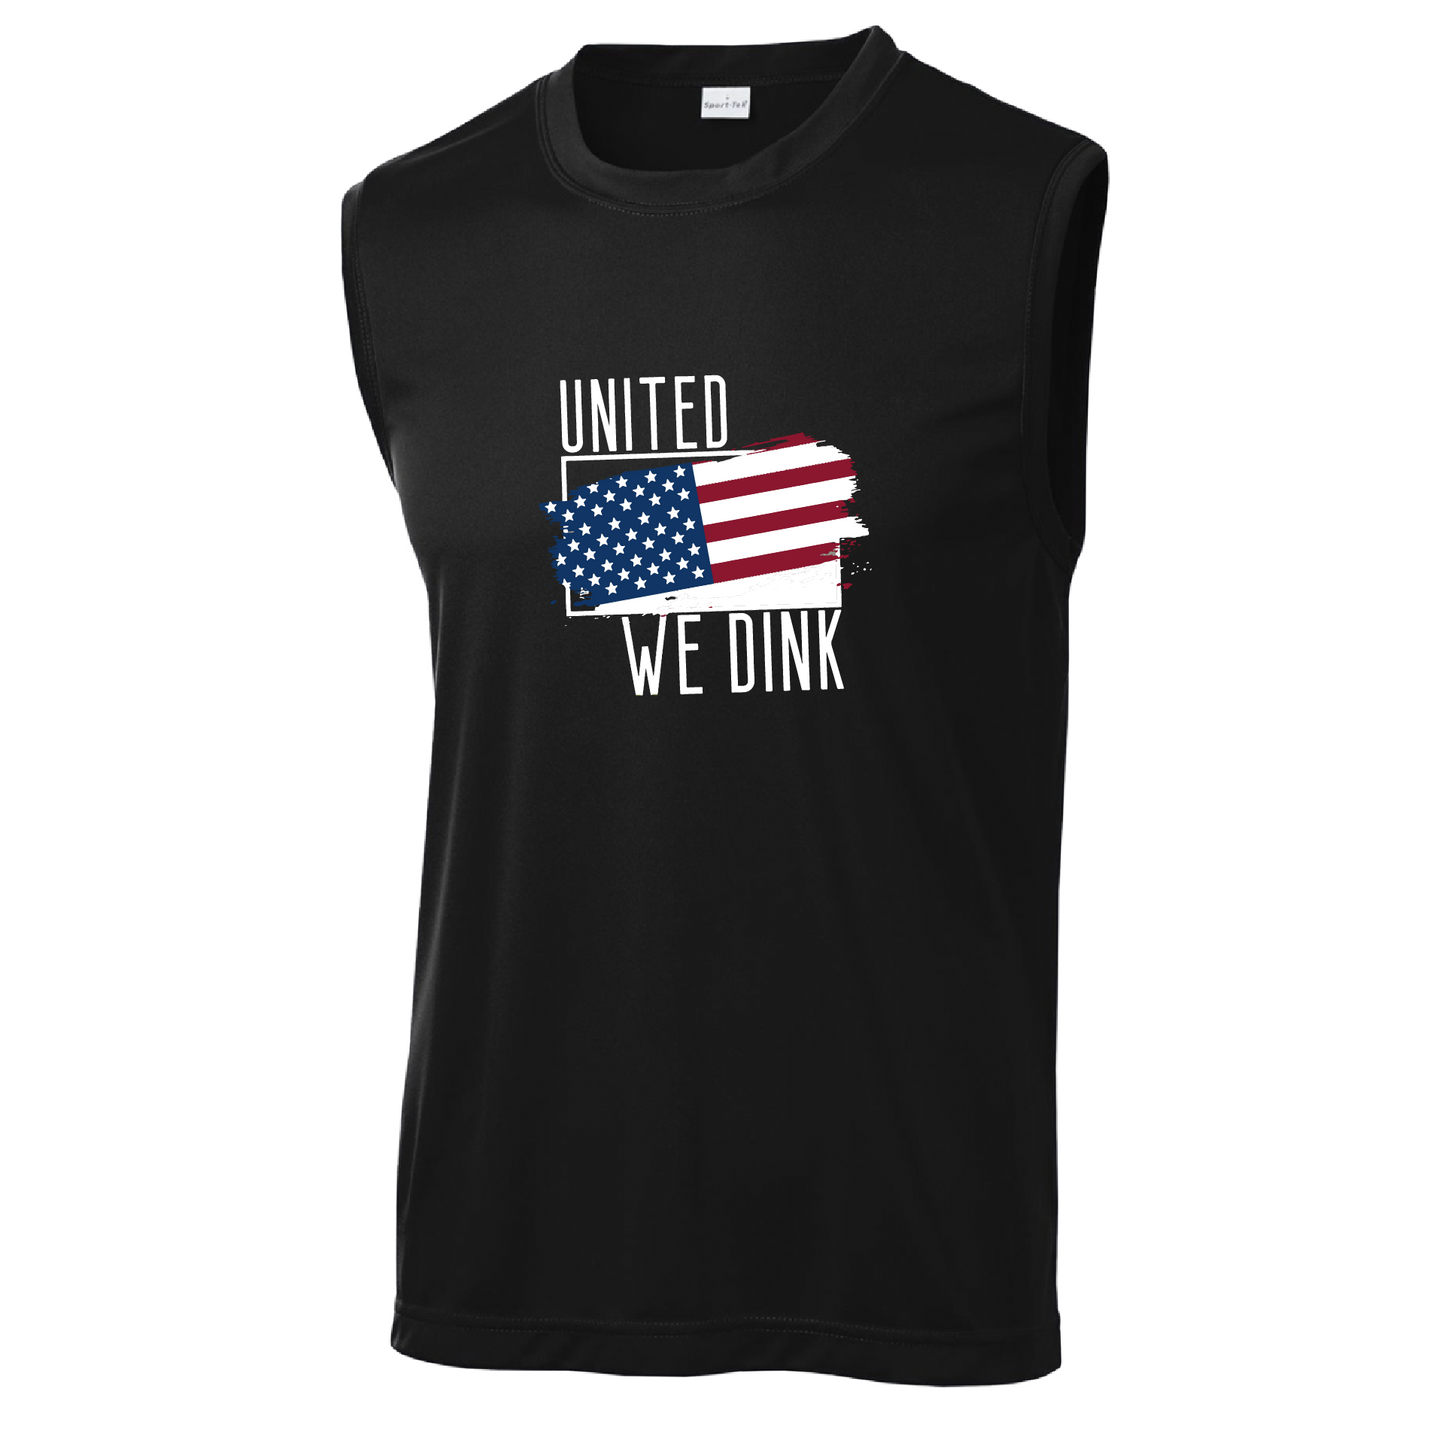 Pickleball Design: United We Dink  Men's Styles: Sleeveless  Shirts are lightweight, roomy and highly breathable. These moisture-wicking shirts are designed for athletic performance. They feature PosiCharge technology to lock in color and prevent logos from fading. Removable tag and set-in sleeves for comfort.